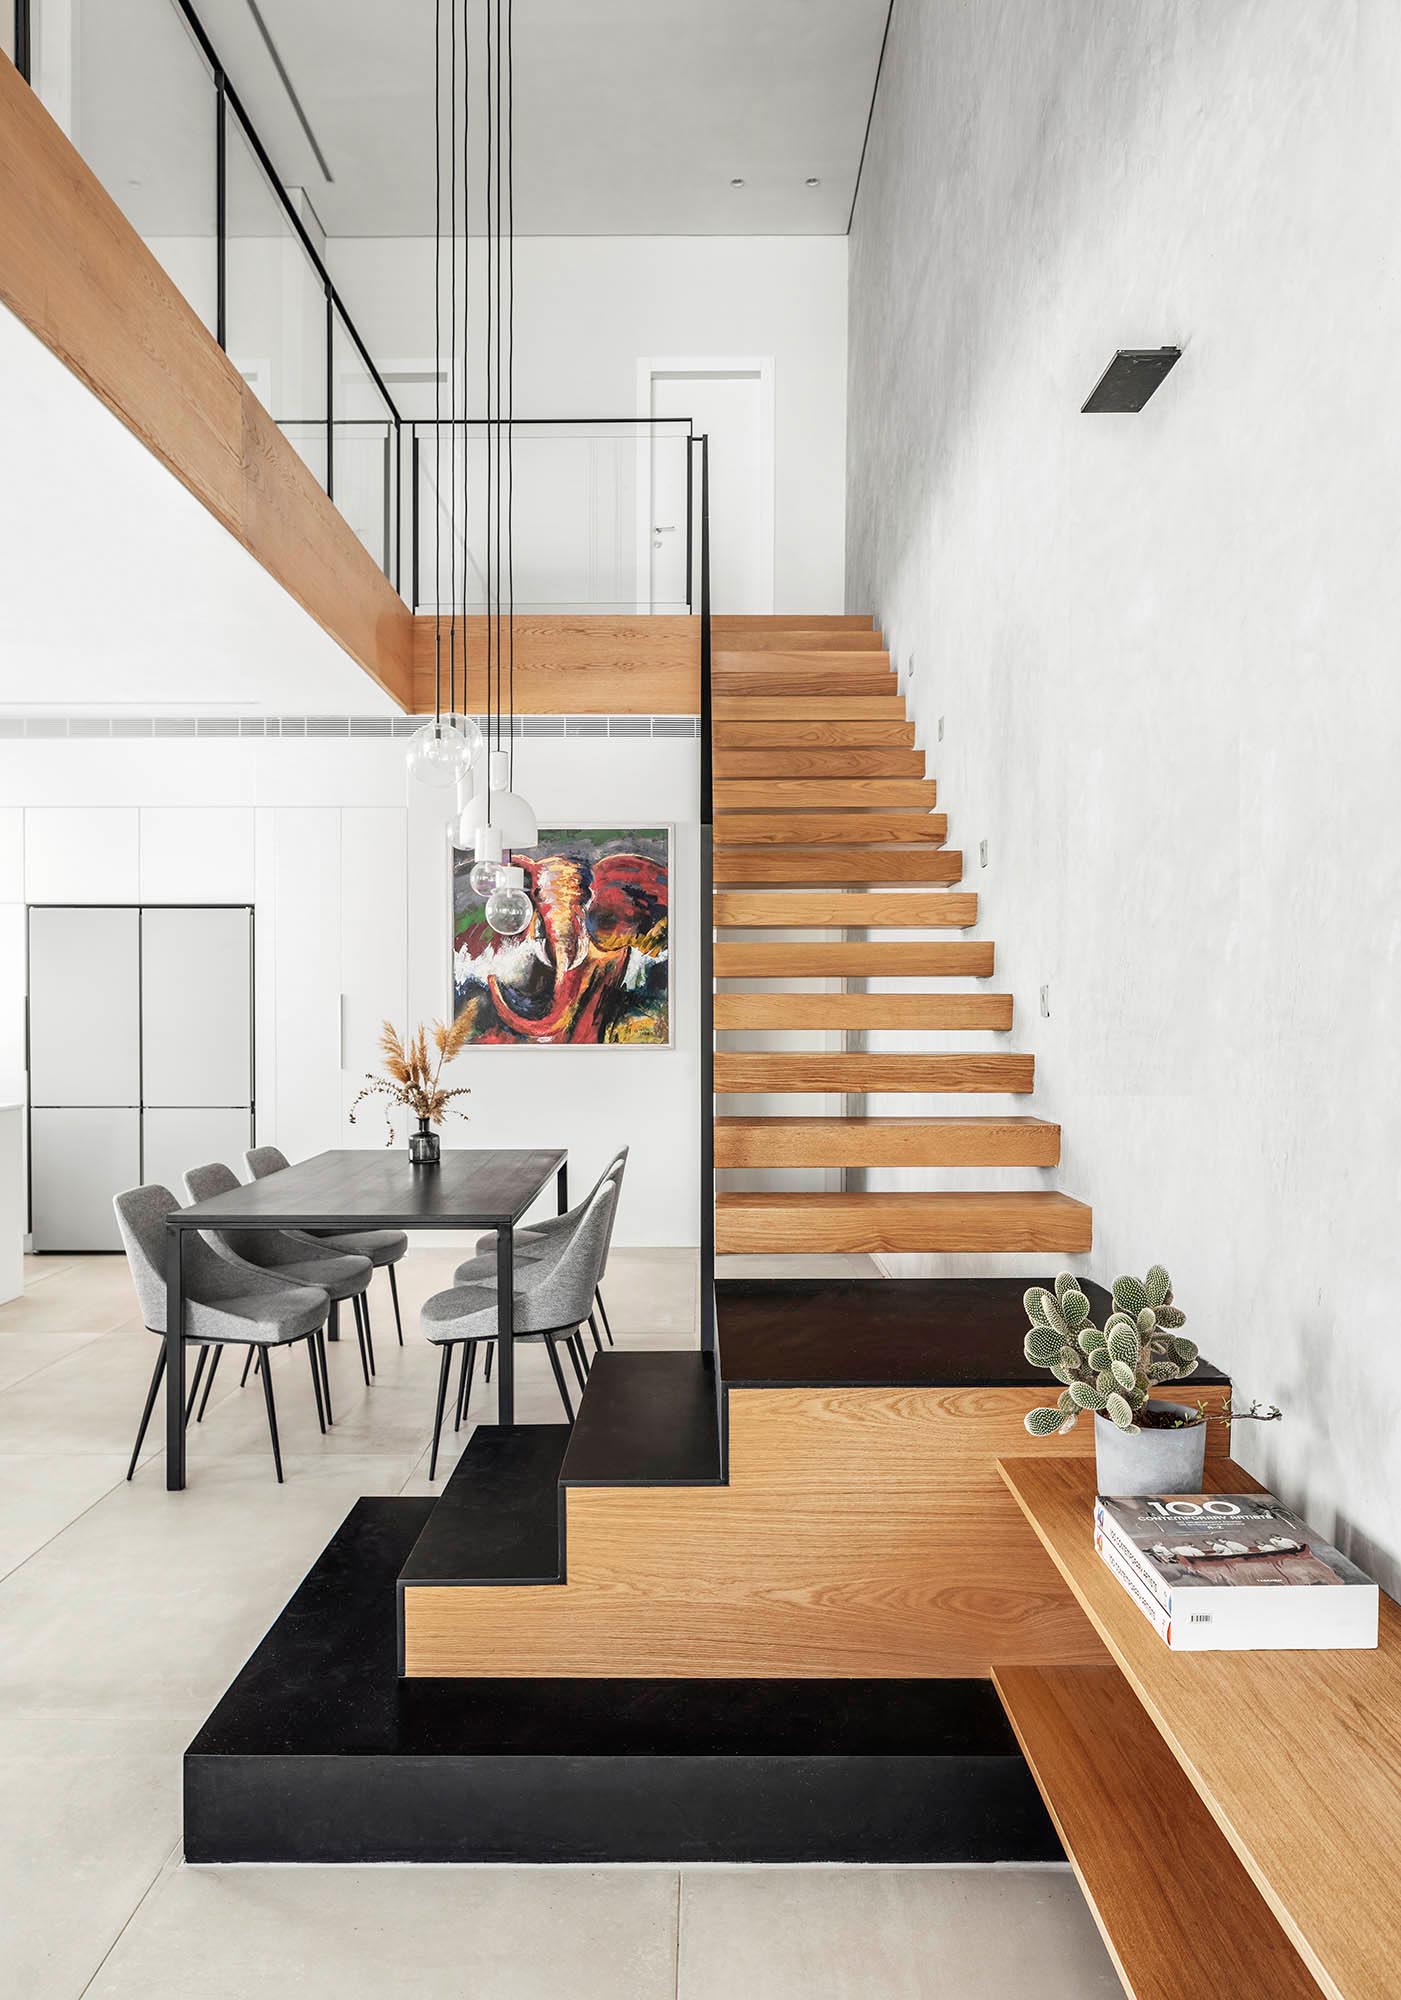 A floating oak staircase connects the various levels of this modern home, incorporates black iron stairs at the bottom, and transitions to become the TV sideboard in the living room.